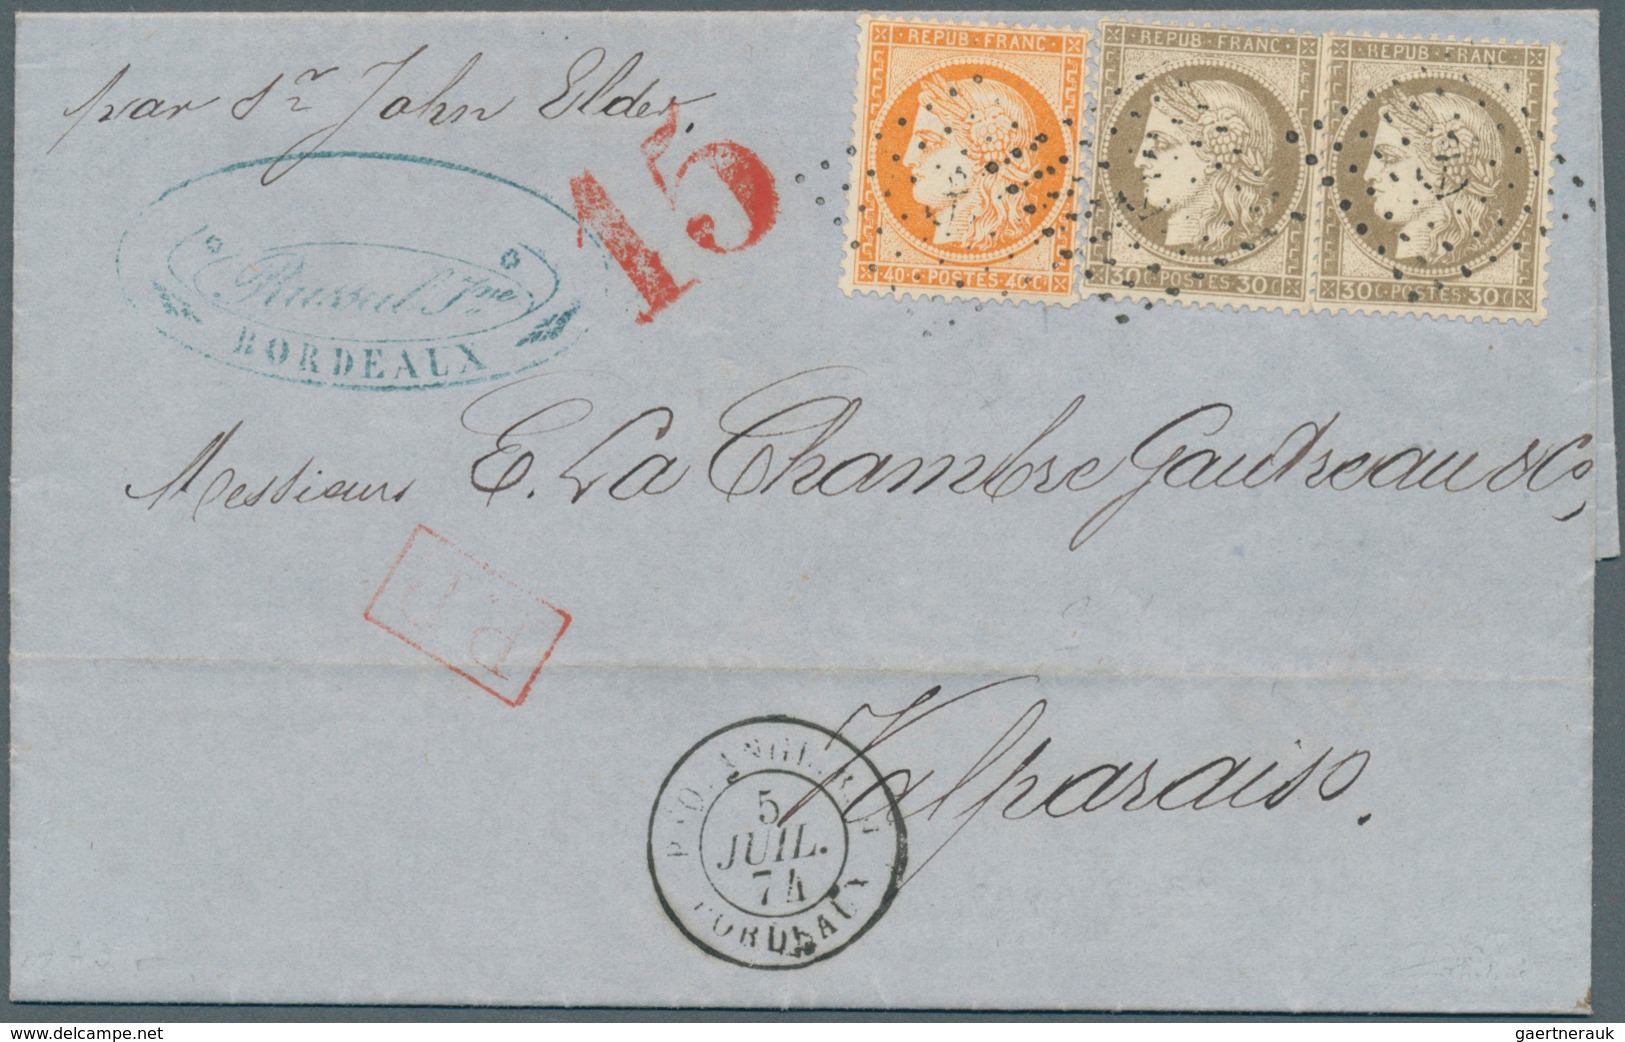 Frankreich: 1874. Envelope Written From Bordeaux '3rd June 1874' Addressed To Valparasio, Chile Bear - Covers & Documents